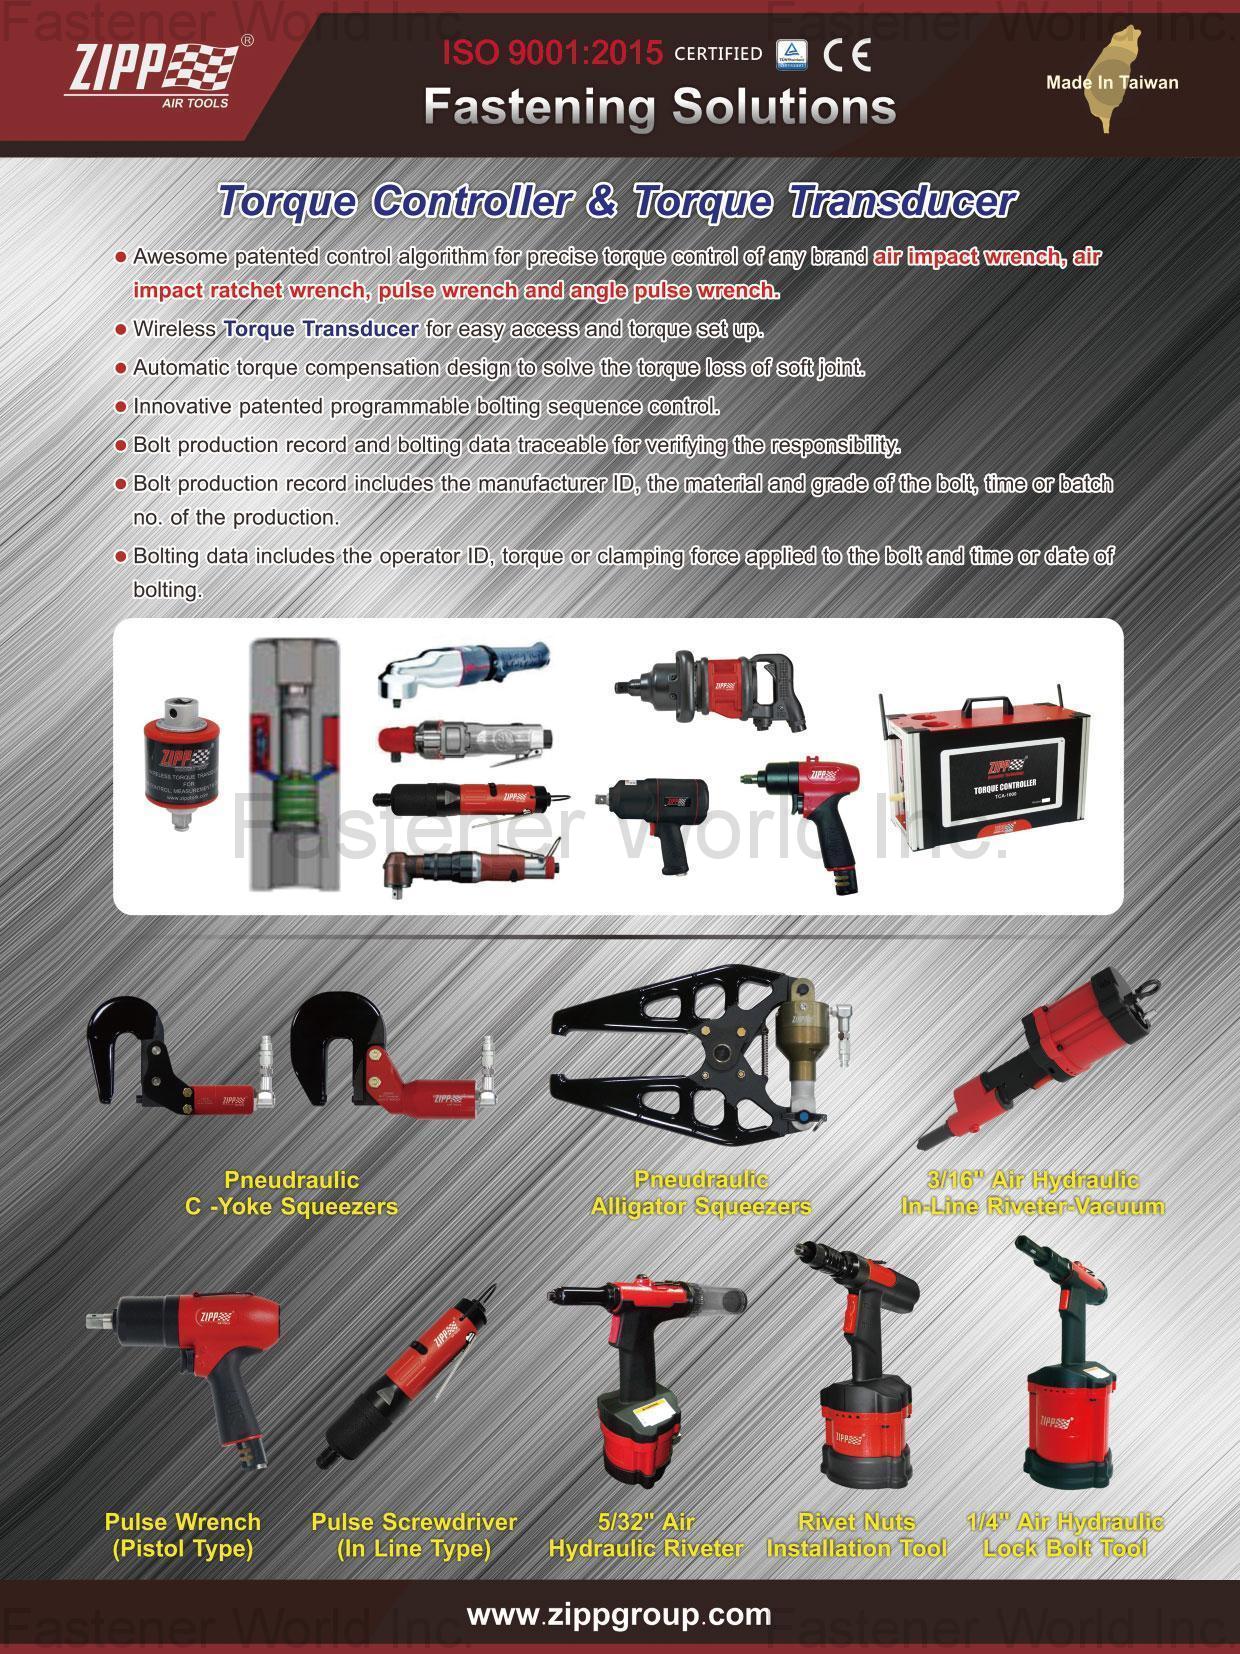 CHINA PNEUMATIC CORPORATION , Pneudraulic C-Yoke Squeezers, Pneudraulic Alligator Squeezers, Air Hydraulic In-Line Riveter-Vacuum, Pulse Wrench, Pulse Screwdrive, Air Hydraulic Riveter, Rivet Nuts Installation Tool, Air Hydraulic Lock Bolt Tool , AIR WRENCH/AIR IMPACT WRENCH